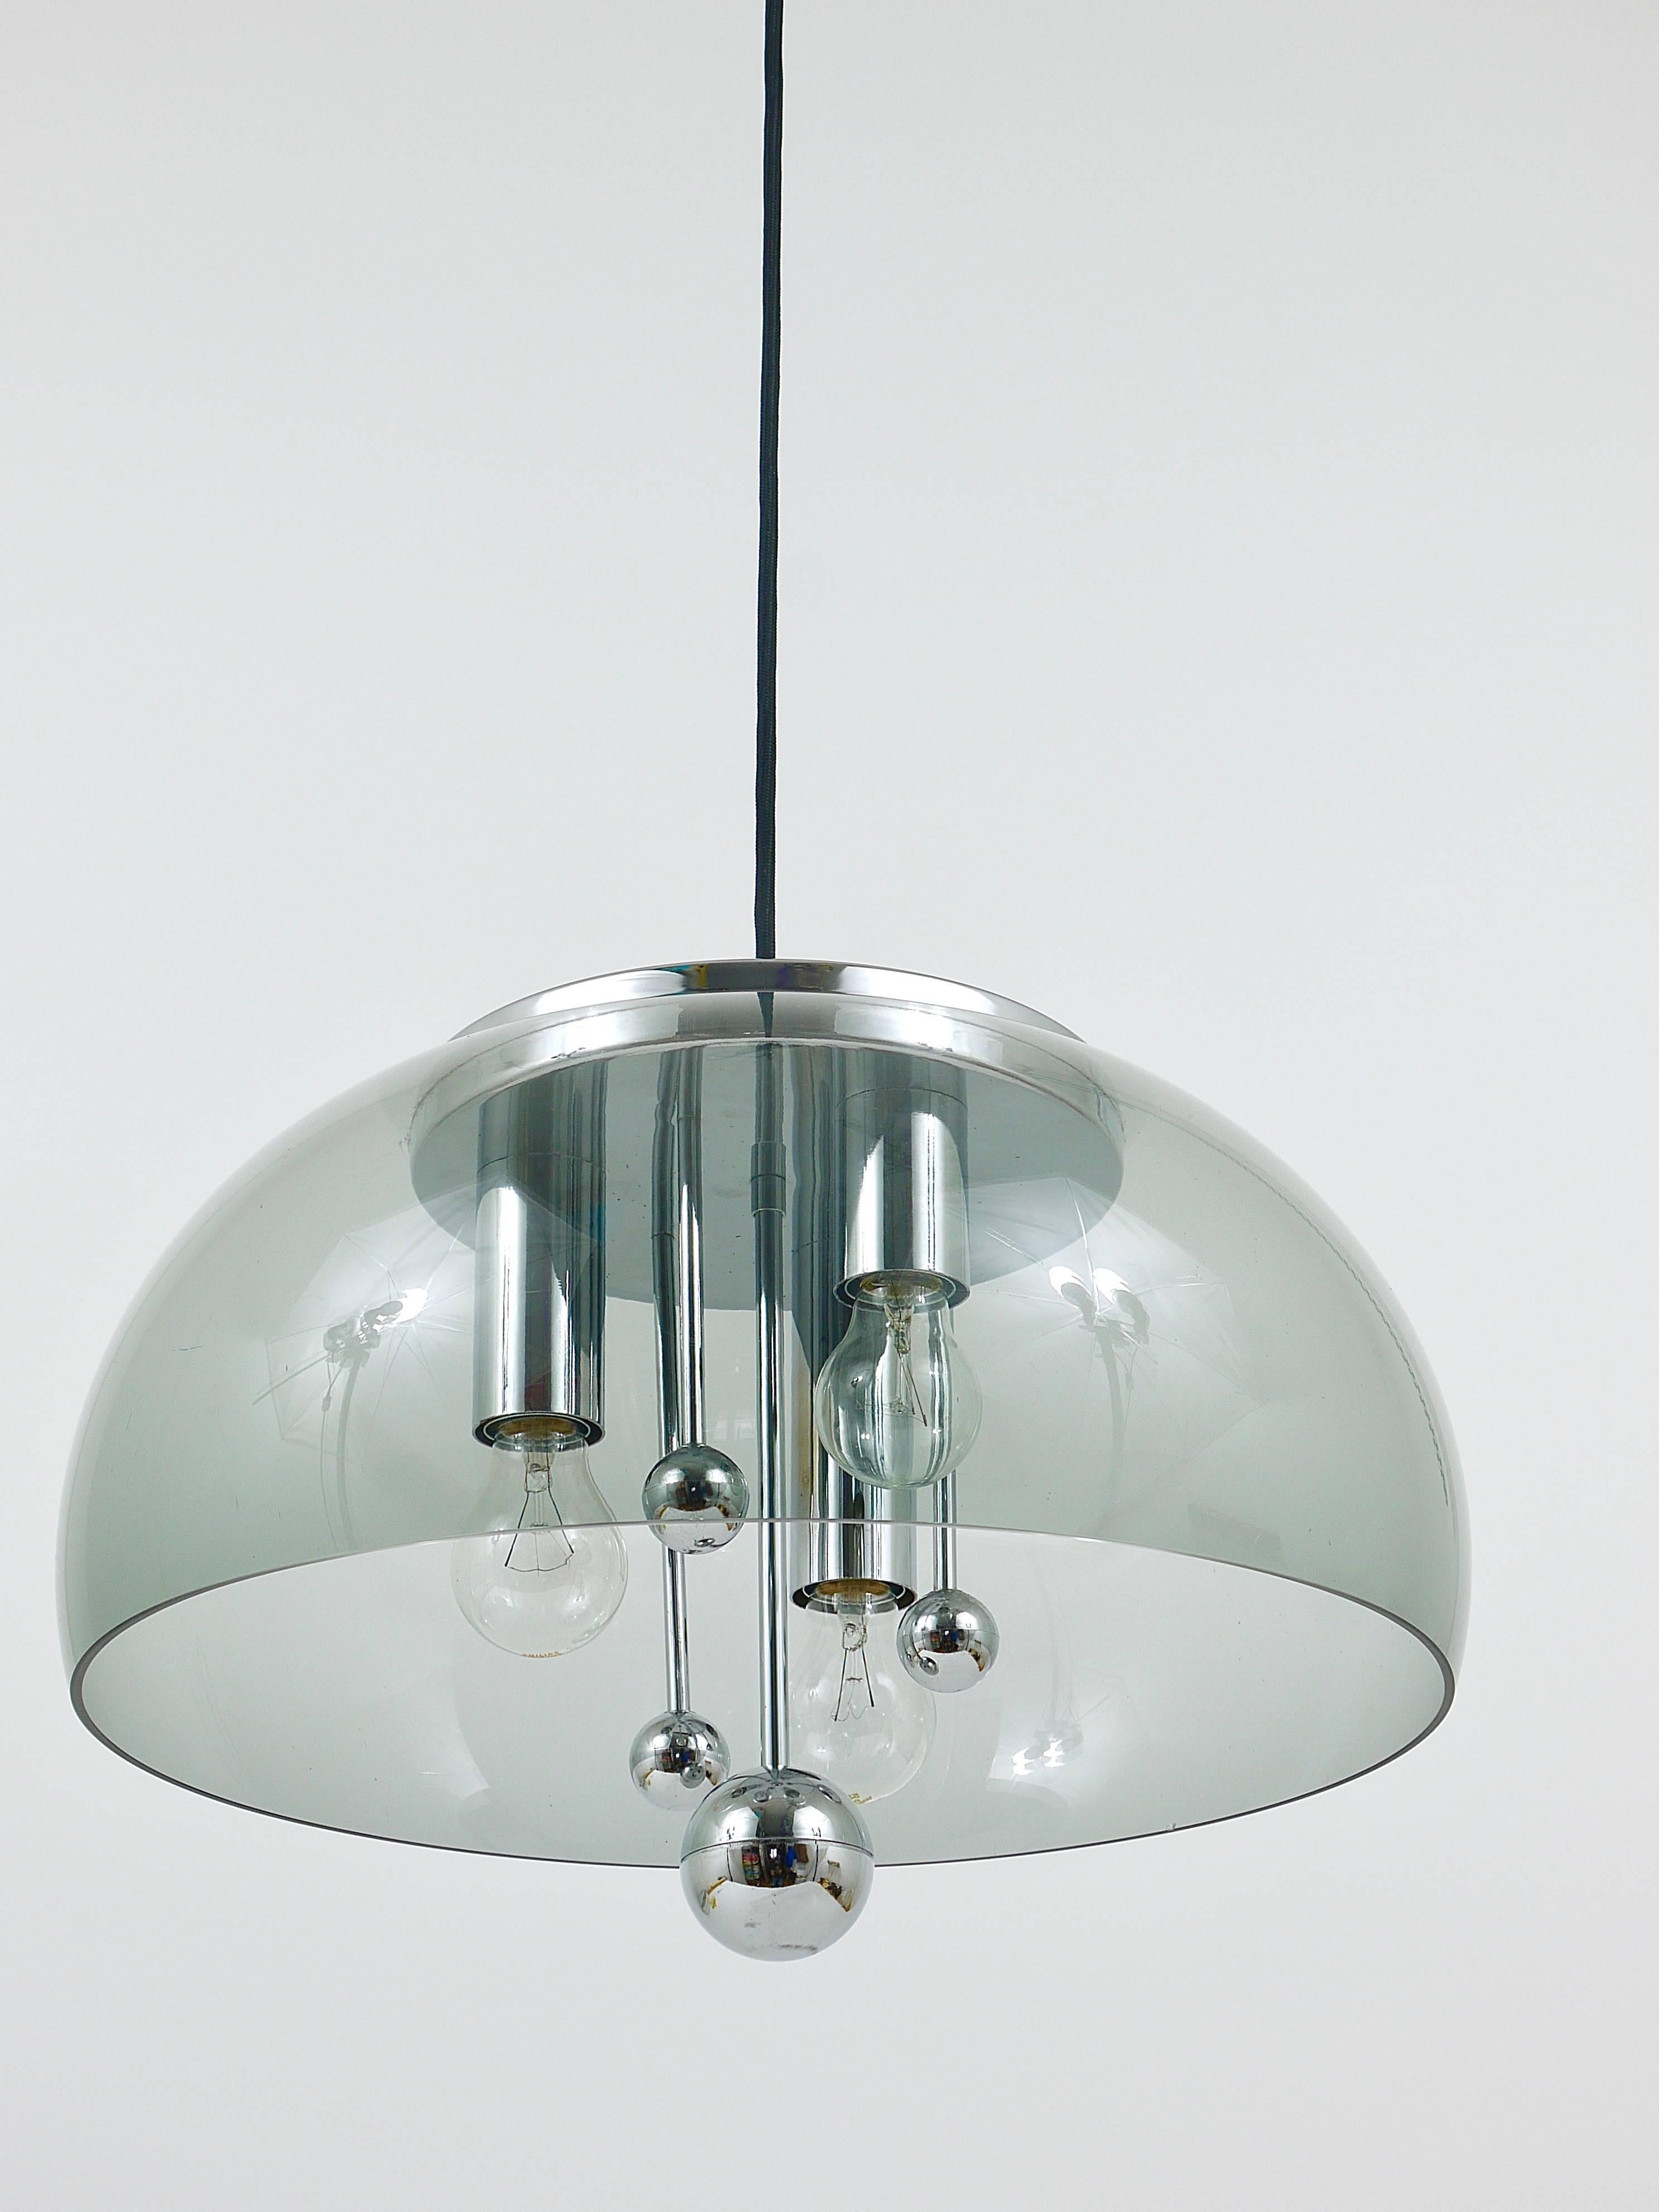 Midcentury Space Age Globe Pendant Lamp with Chromed Spheres, Germany, 1970s For Sale 6